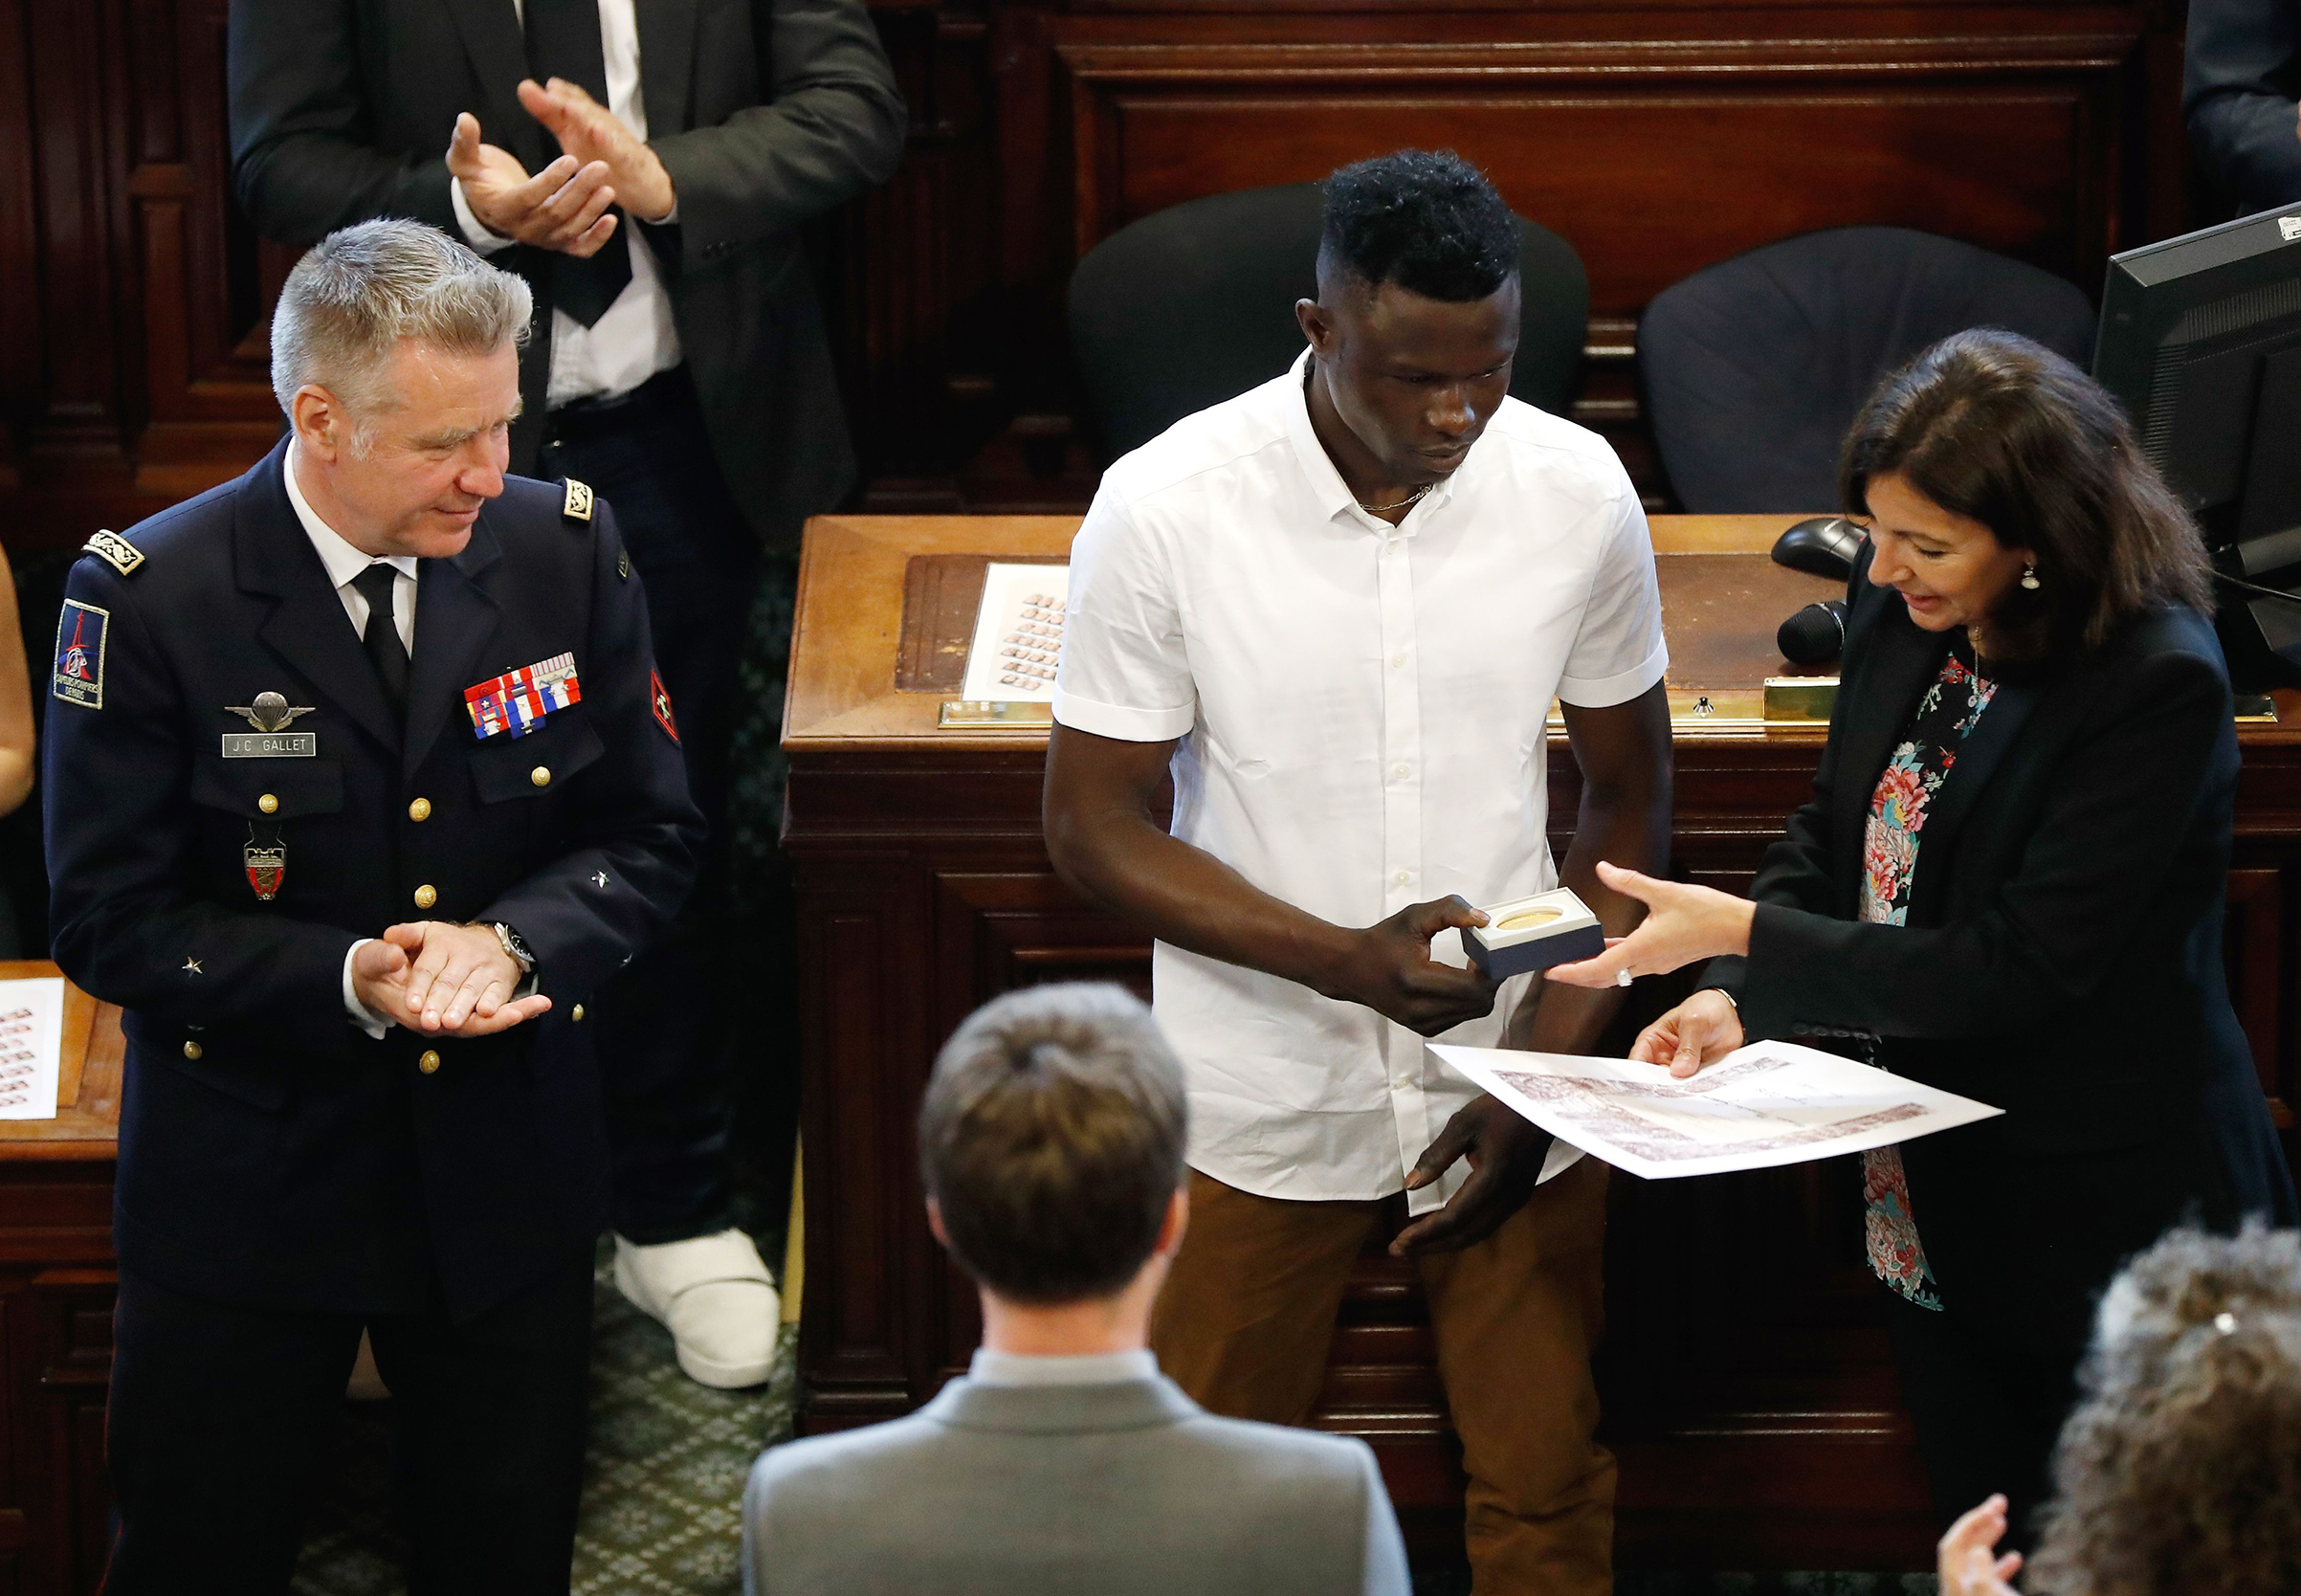 Mamoudou Gassama, center, is awarded with the city's Grand Vermeil medal by Paris' mayor Anne Hidalgo in Paris on June 4, 2018. (Francois Guillot—AFP/Getty Images)